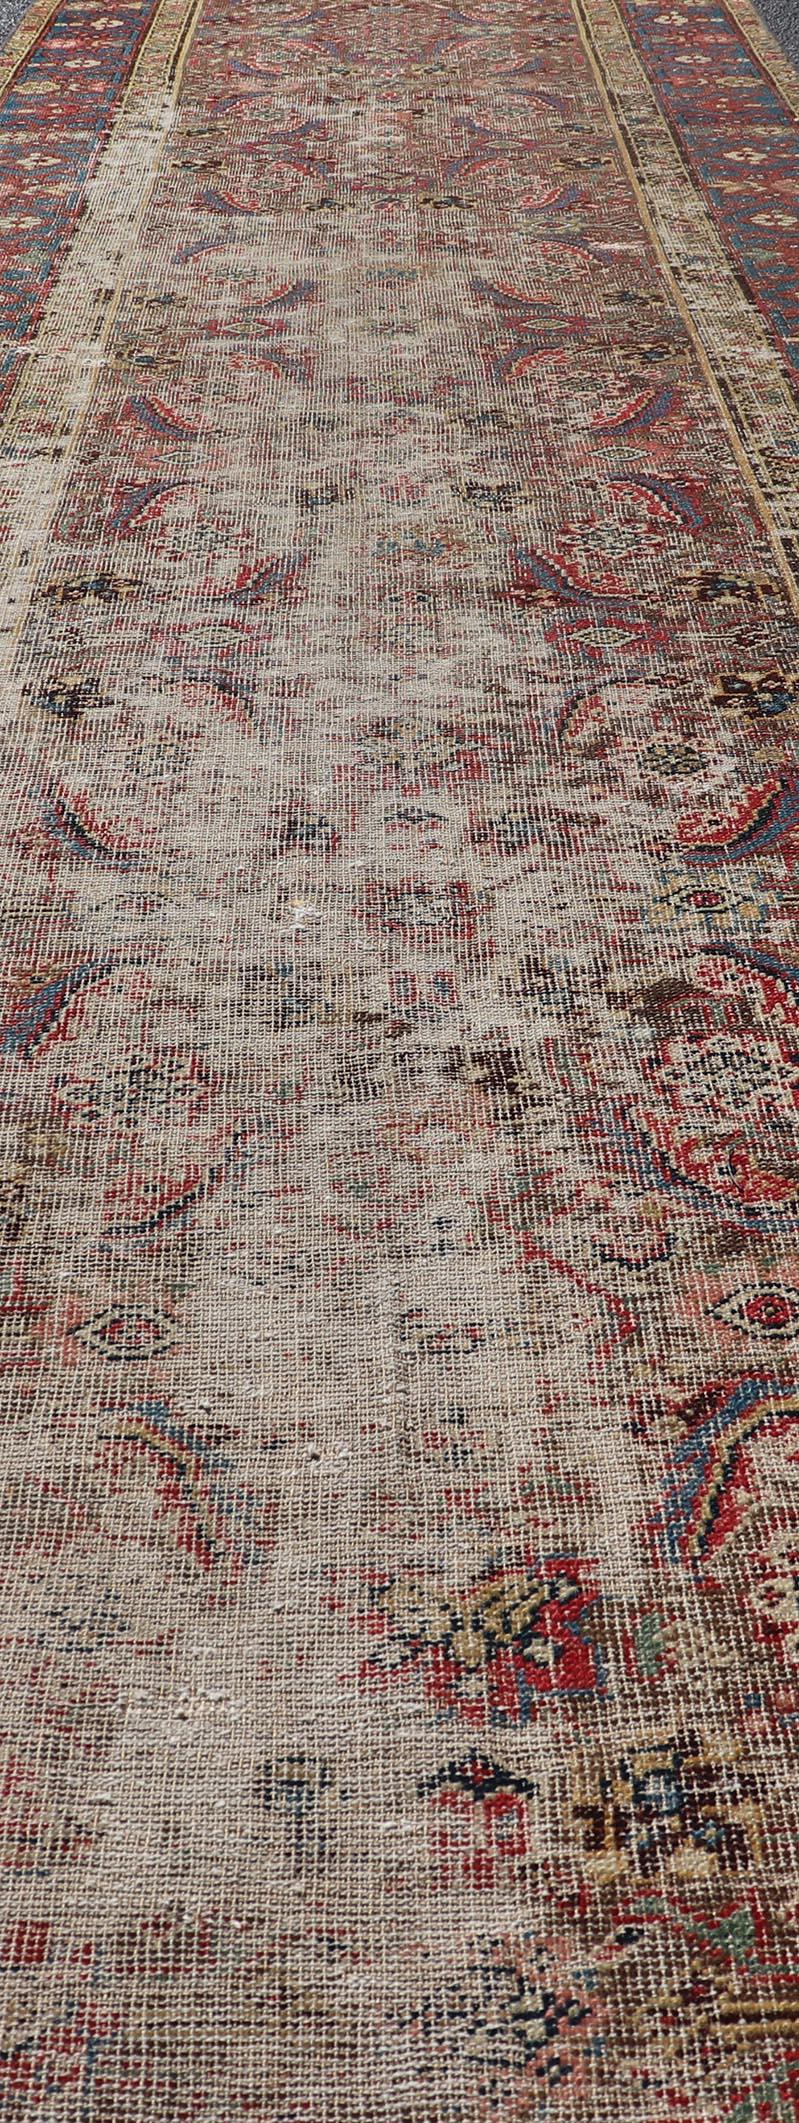 Antique Persian Sultanabad Distressed Runner with Floral Design in Jewel Tones 1